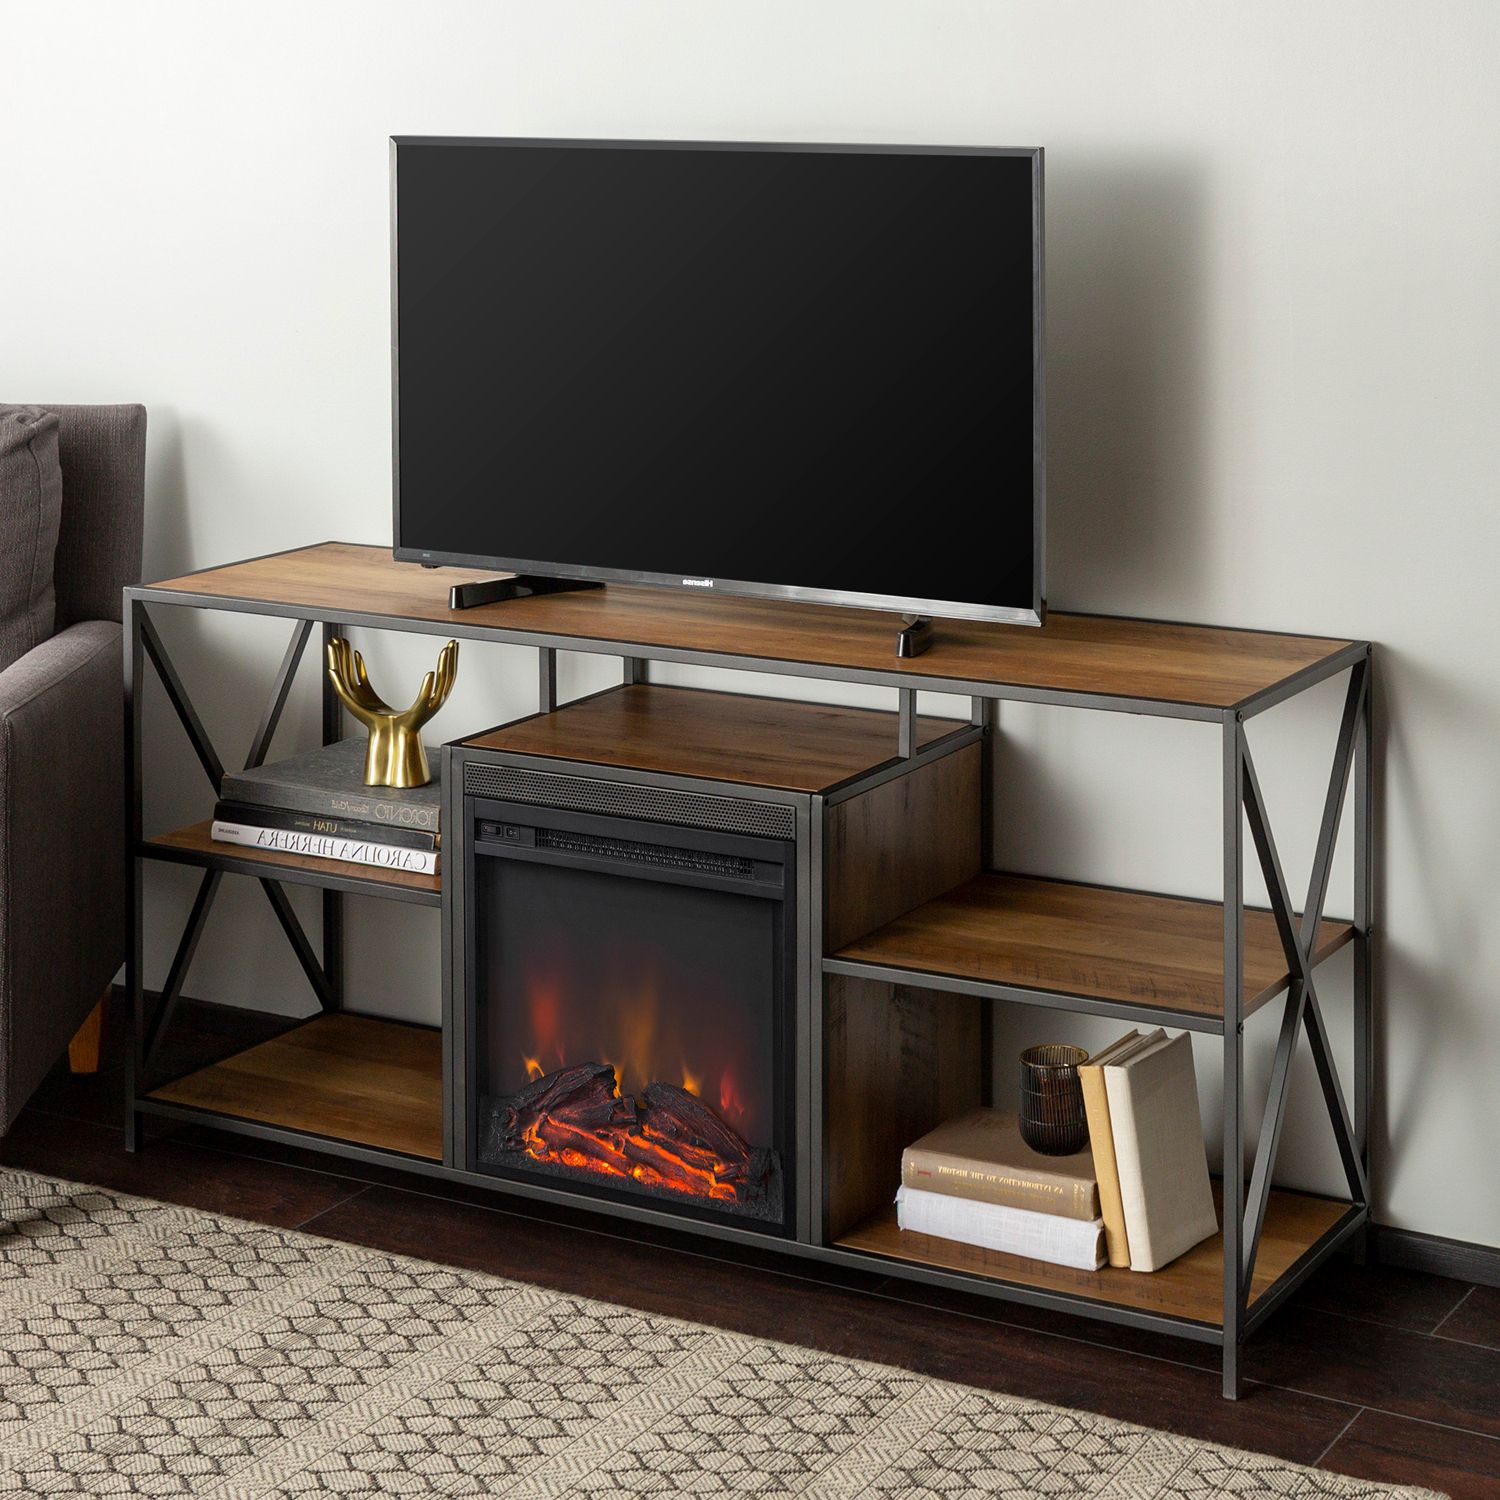 Rustic Oak Tv Stand With Fireplace – Pier1 With Urban Rustic Tv Stands (Gallery 6 of 20)